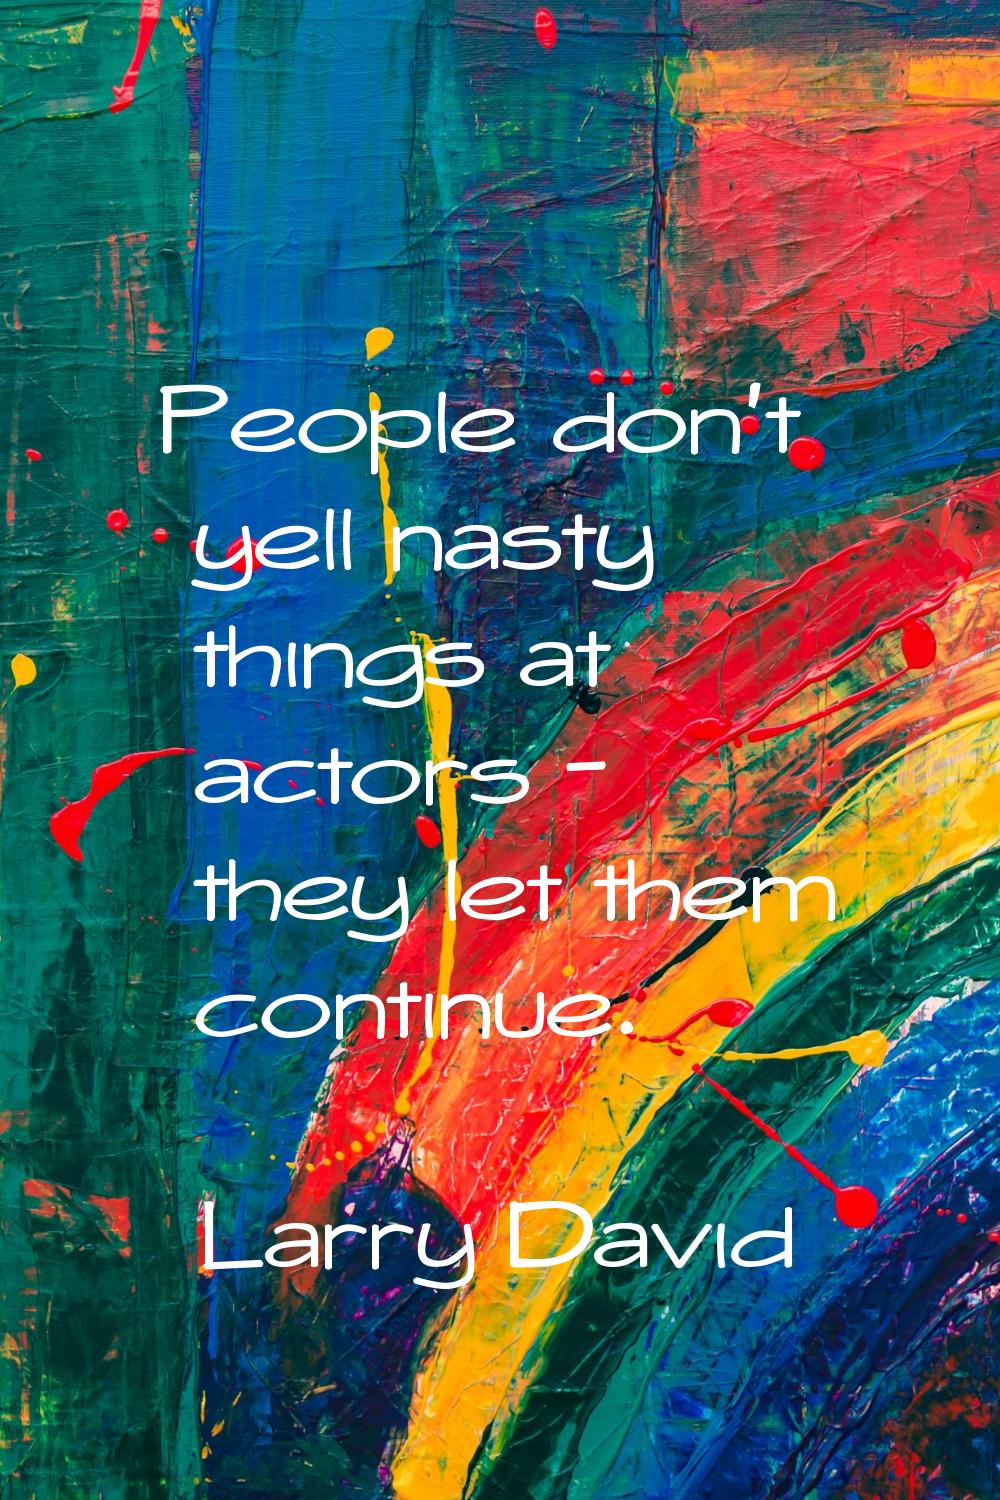 People don't yell nasty things at actors - they let them continue.